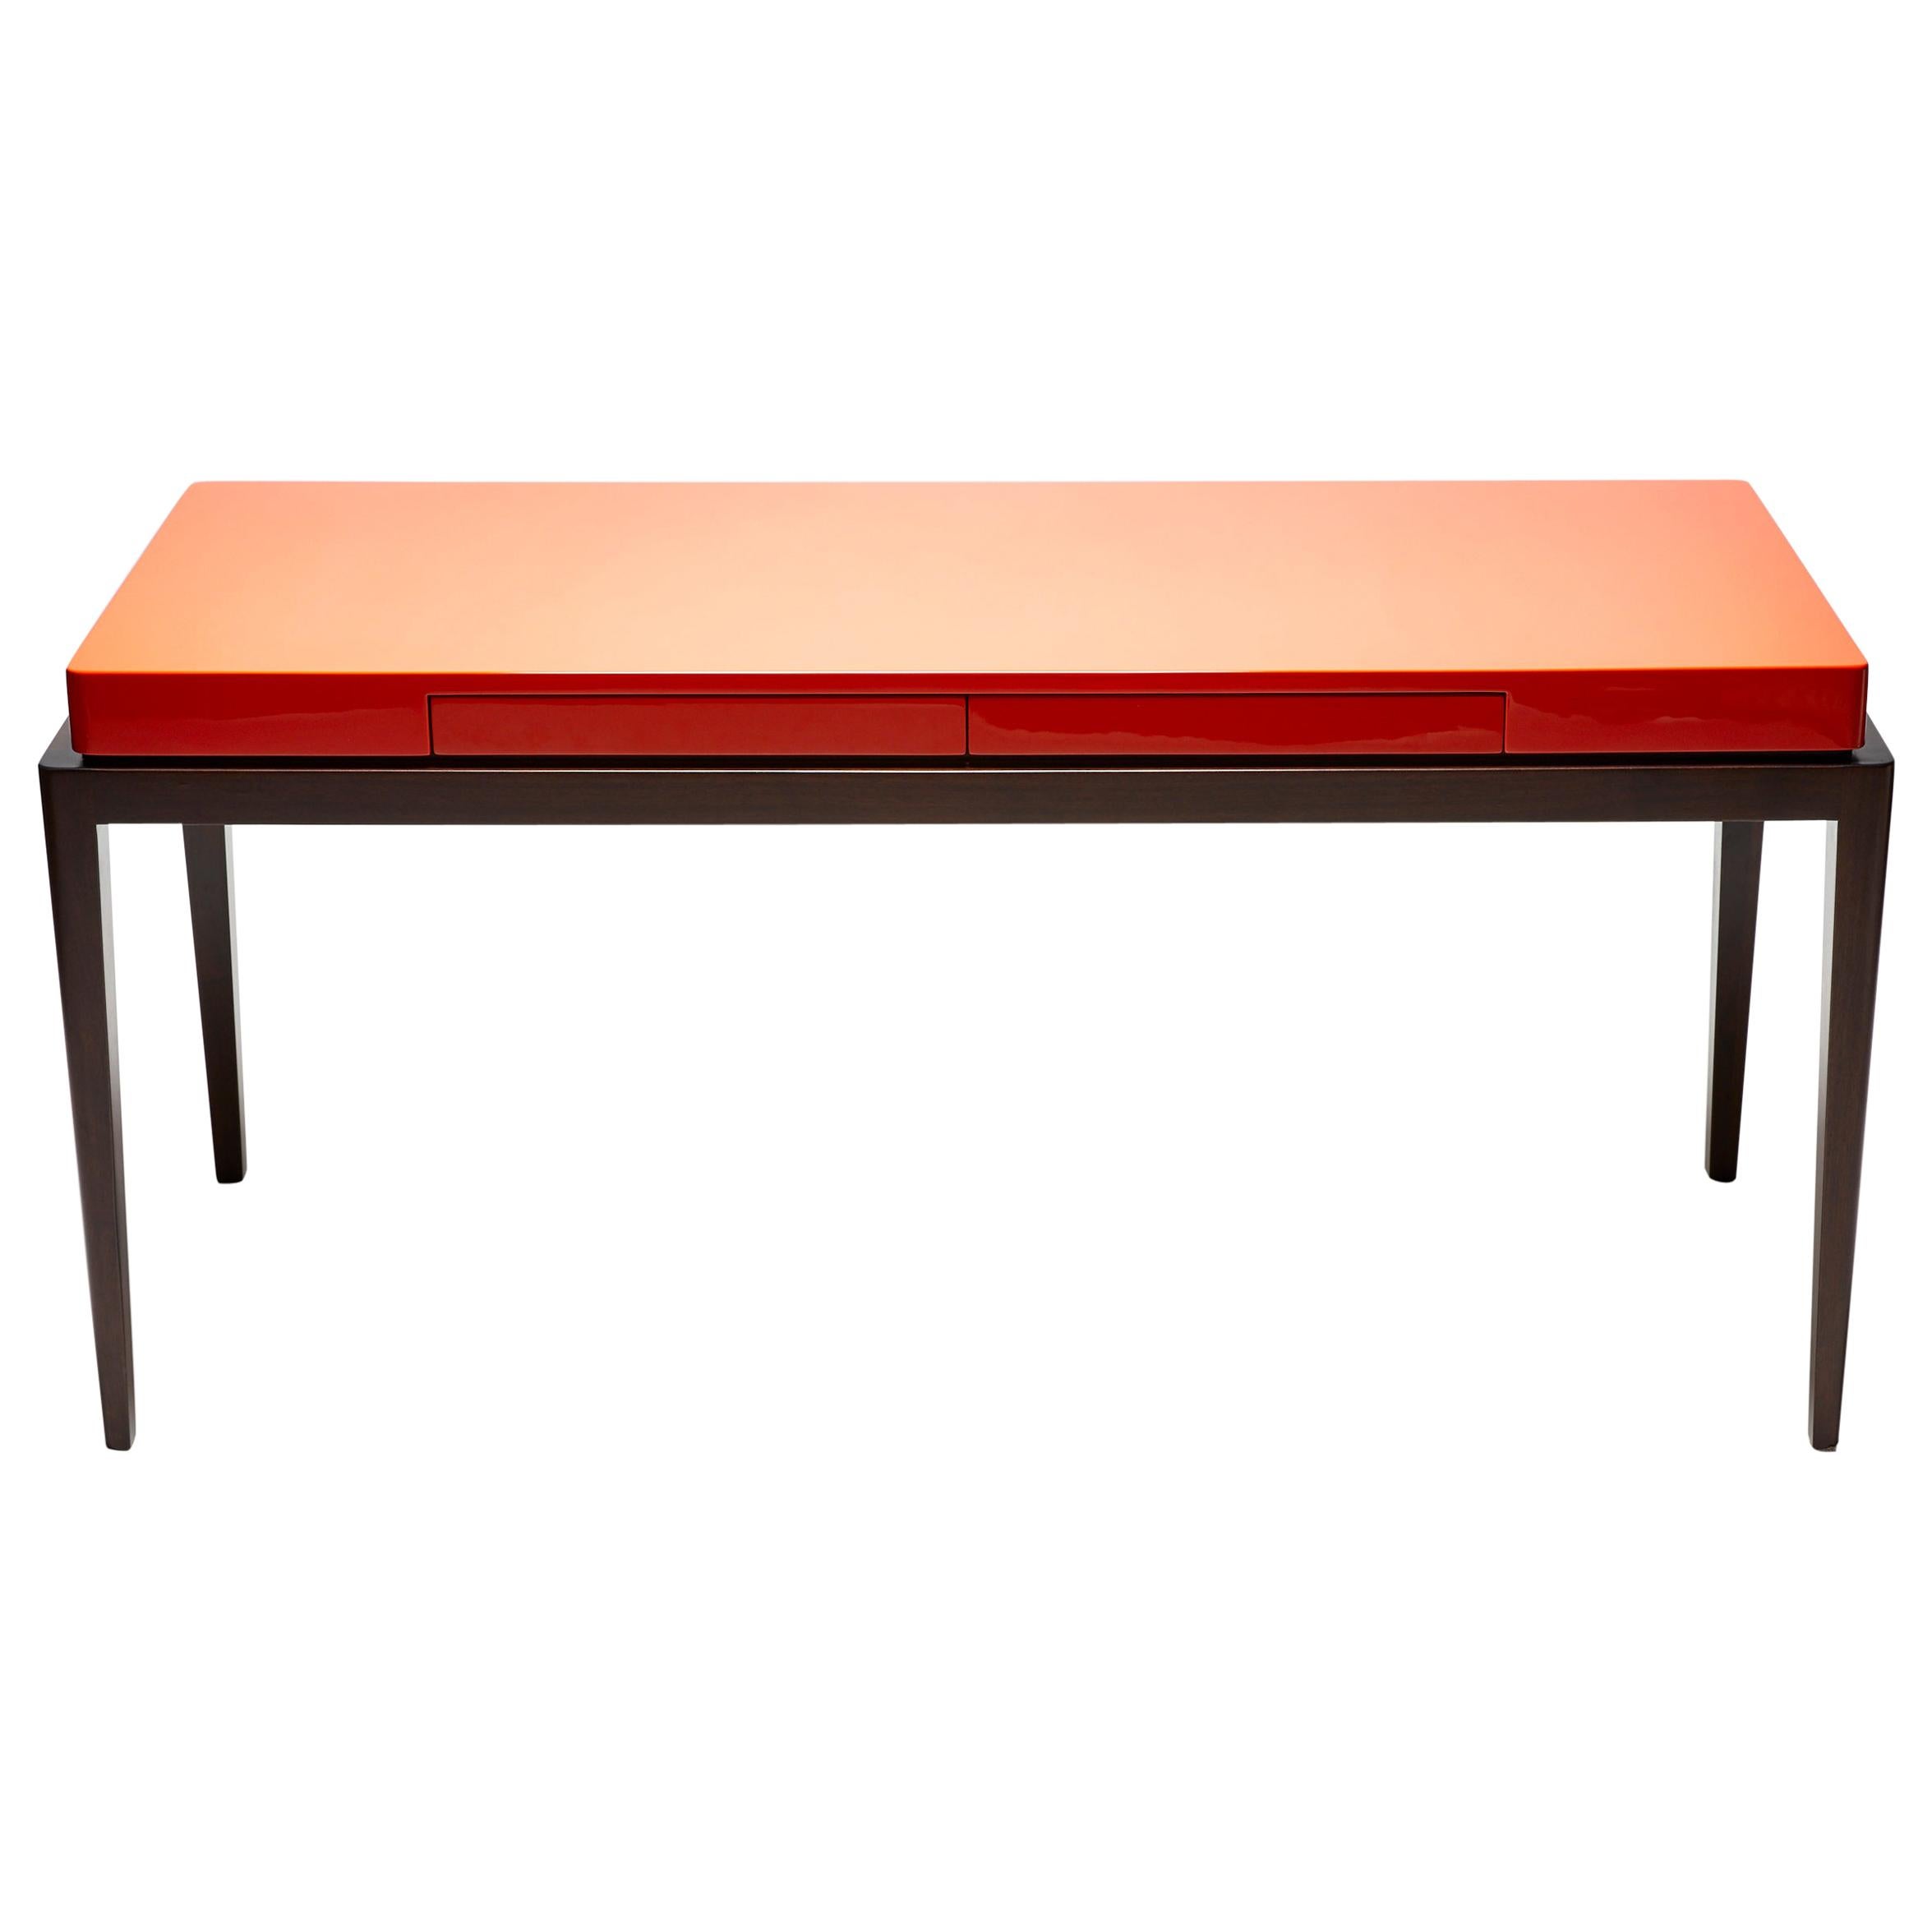 The perfect Interior Writing Desk : 160cm
Flat surface, smooth, purity of the line only asking to be inhabited. If it is a
console or a desk, TARA is a piece that distinguish itself with the power of its
minimalism. It is enough to dress up any